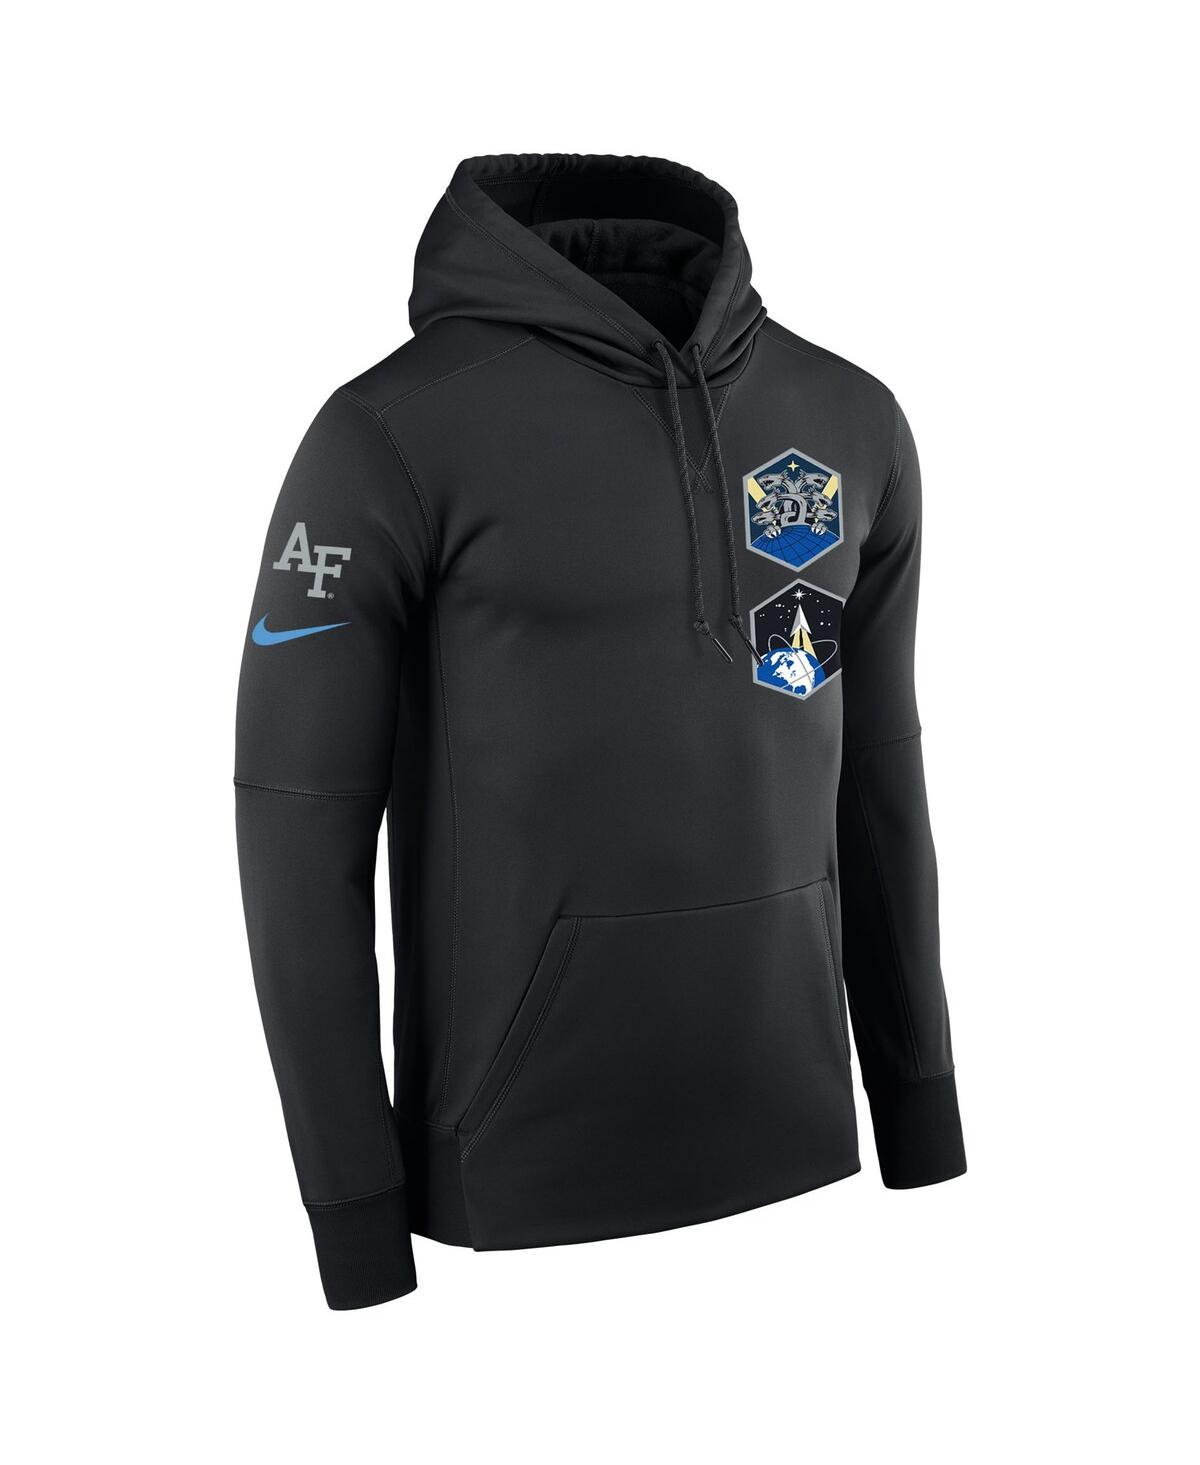 Men's Nike Black Air Force Falcons Space Force Rivalry Badge Therma Pullover Hoodie